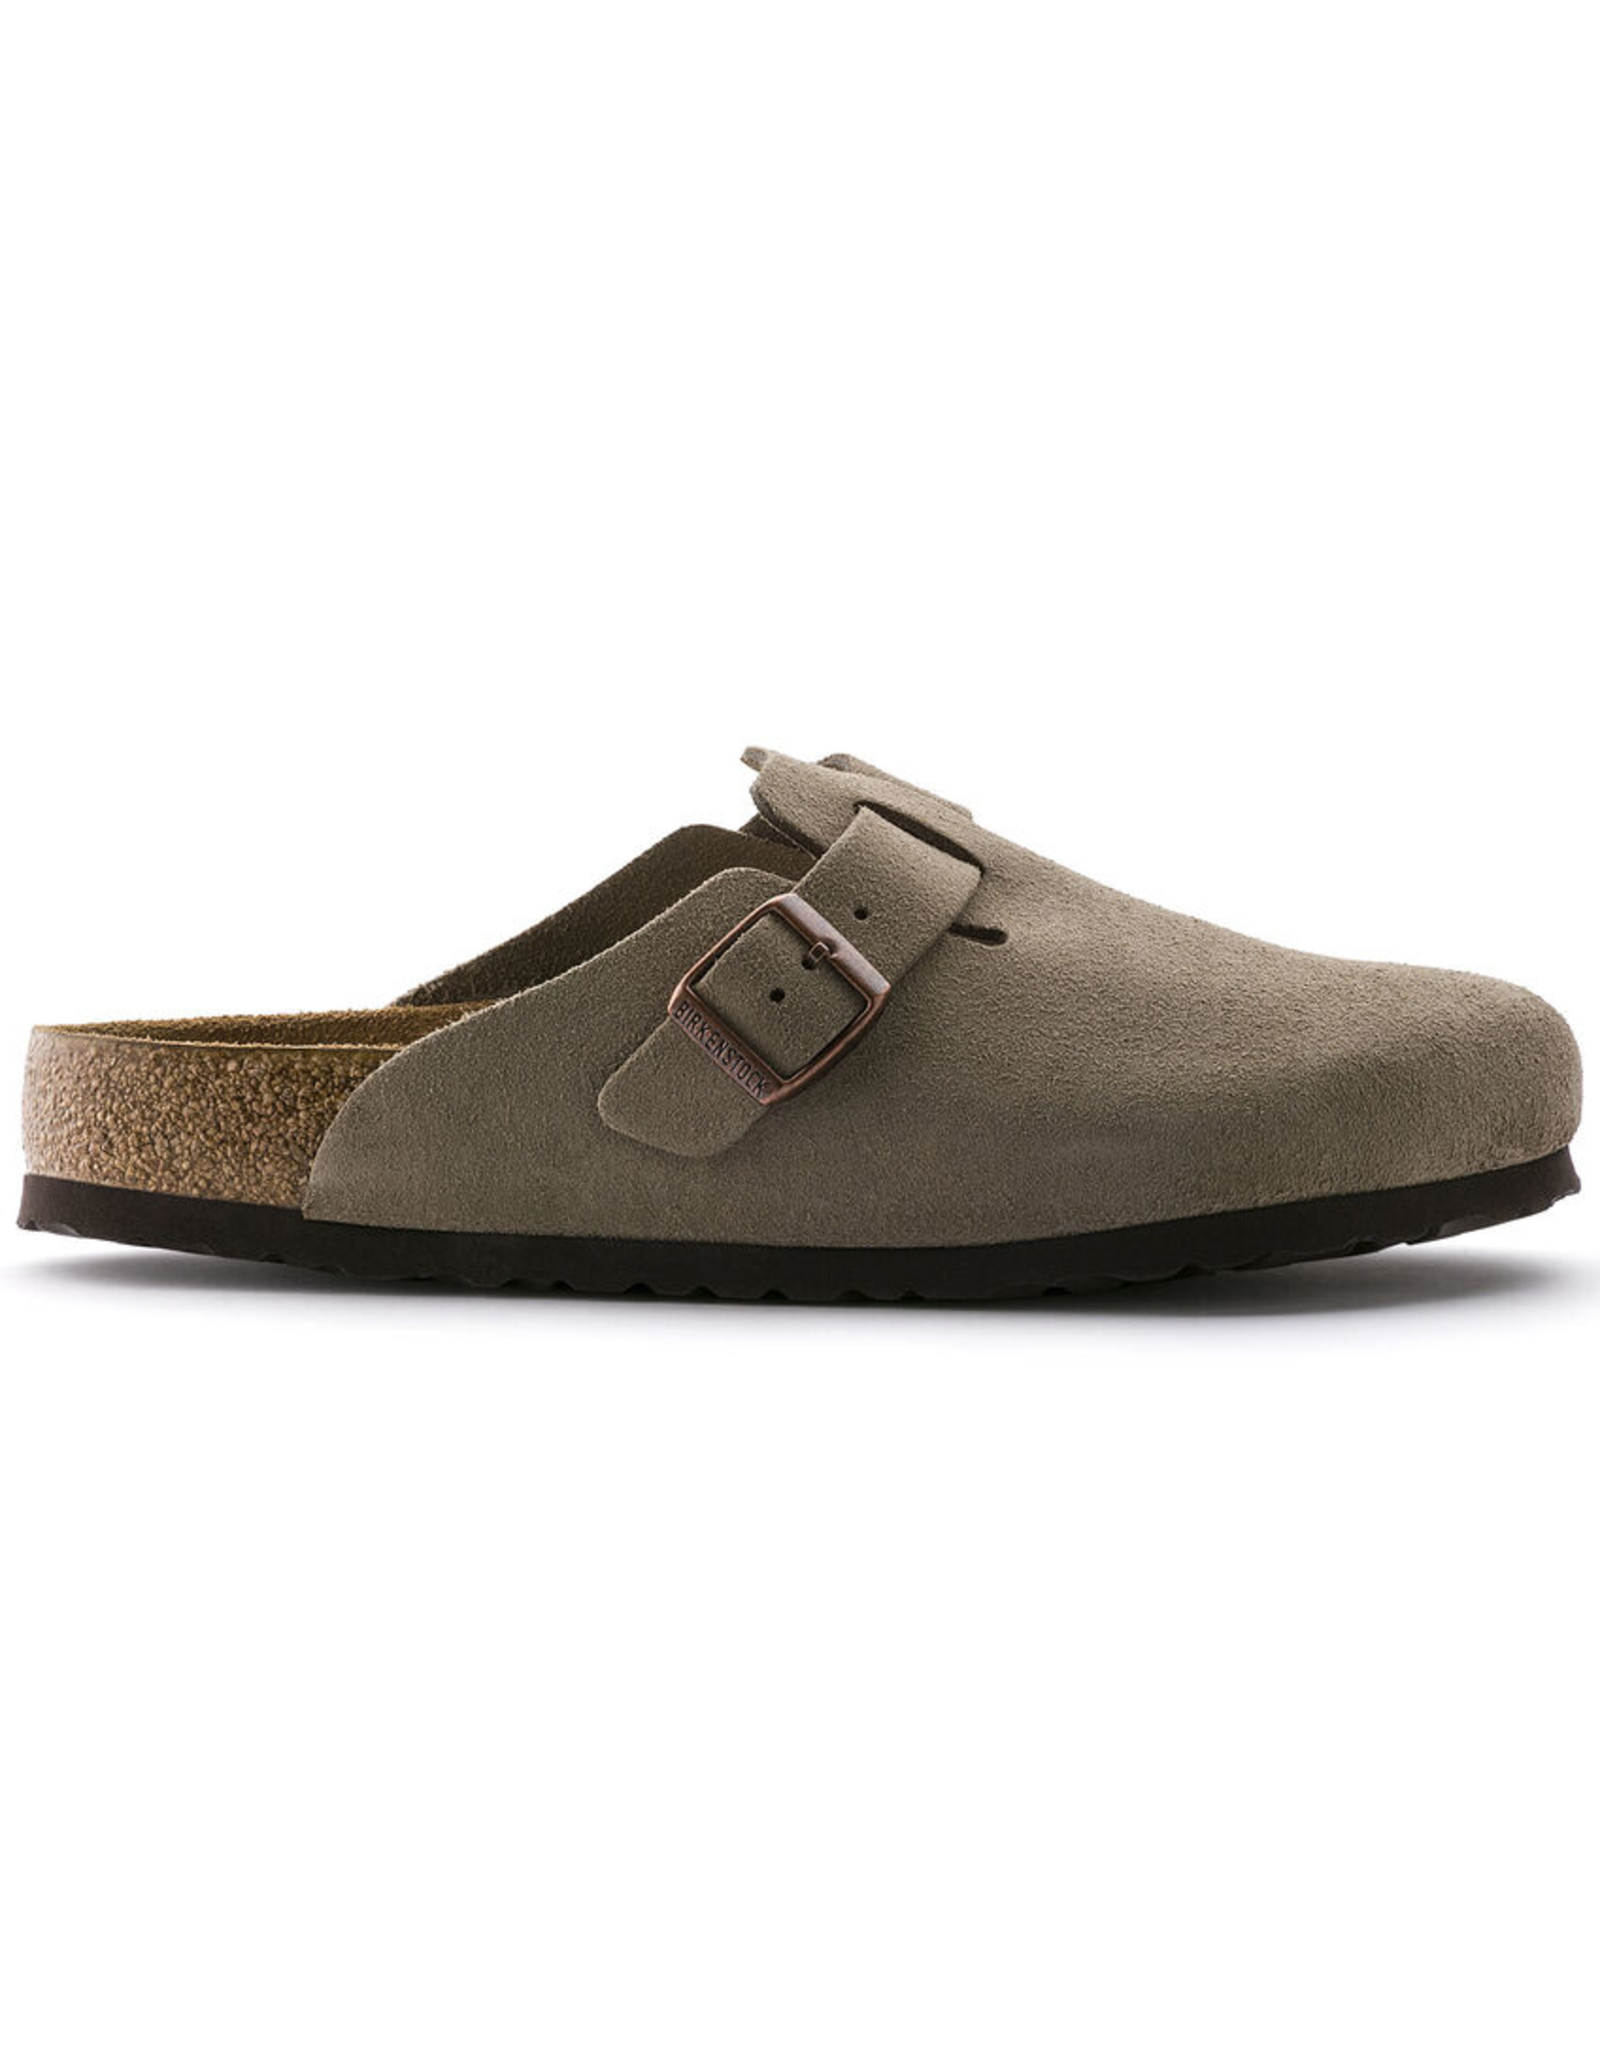 BIRKENSTOCK BOSTON SOFT FOOTBED SUEDE LEATHER-TAUPE